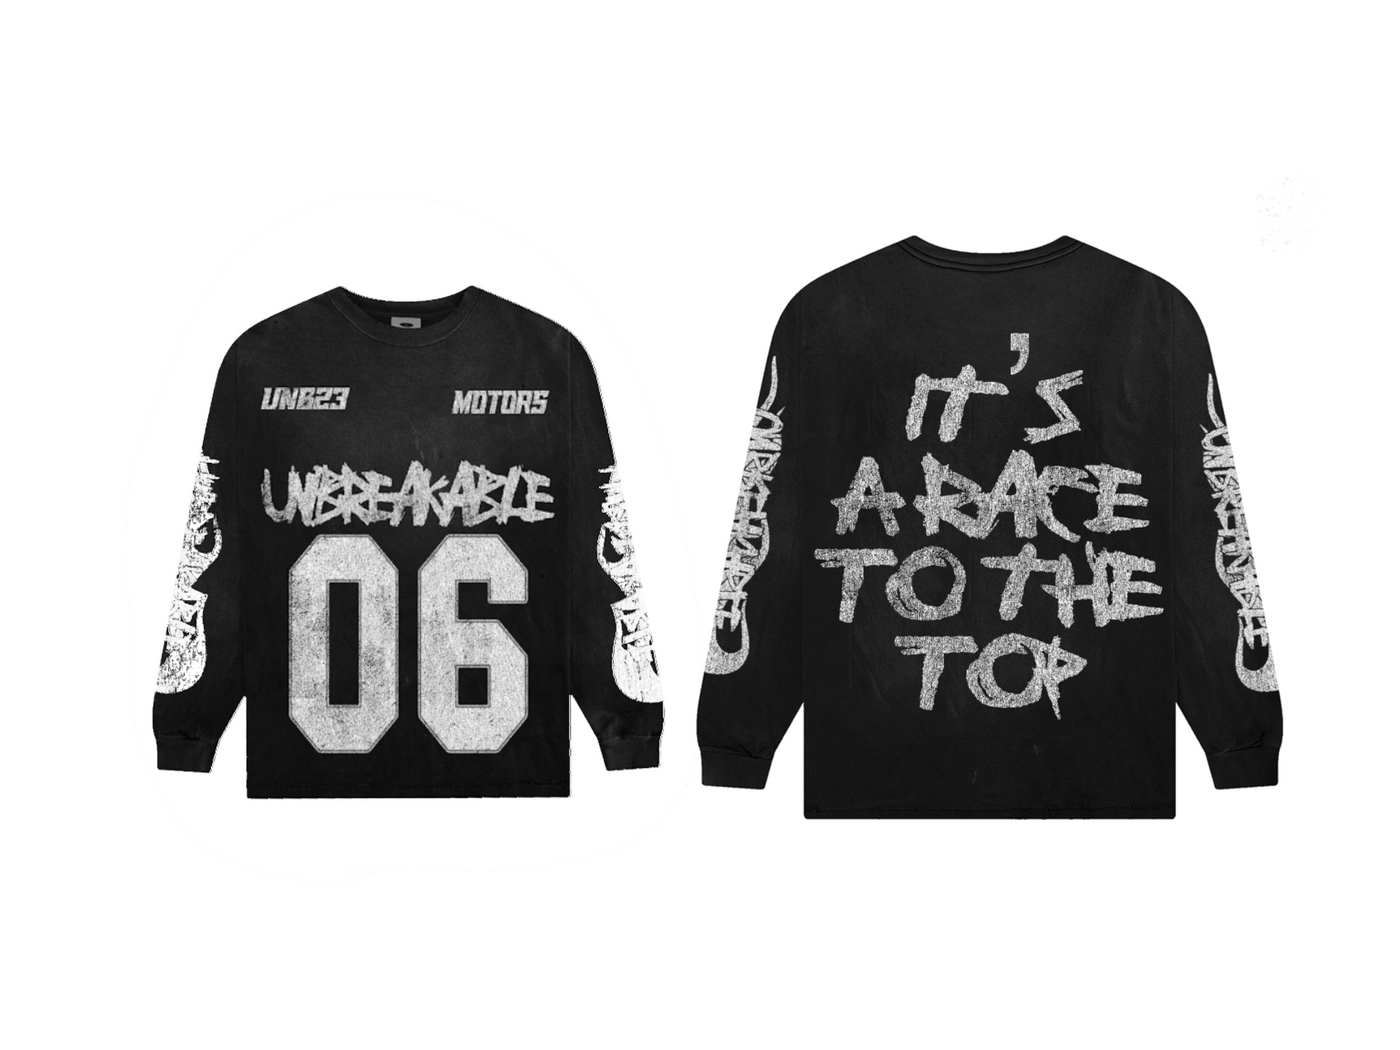 “It’s a Race to the top” Longsleeve